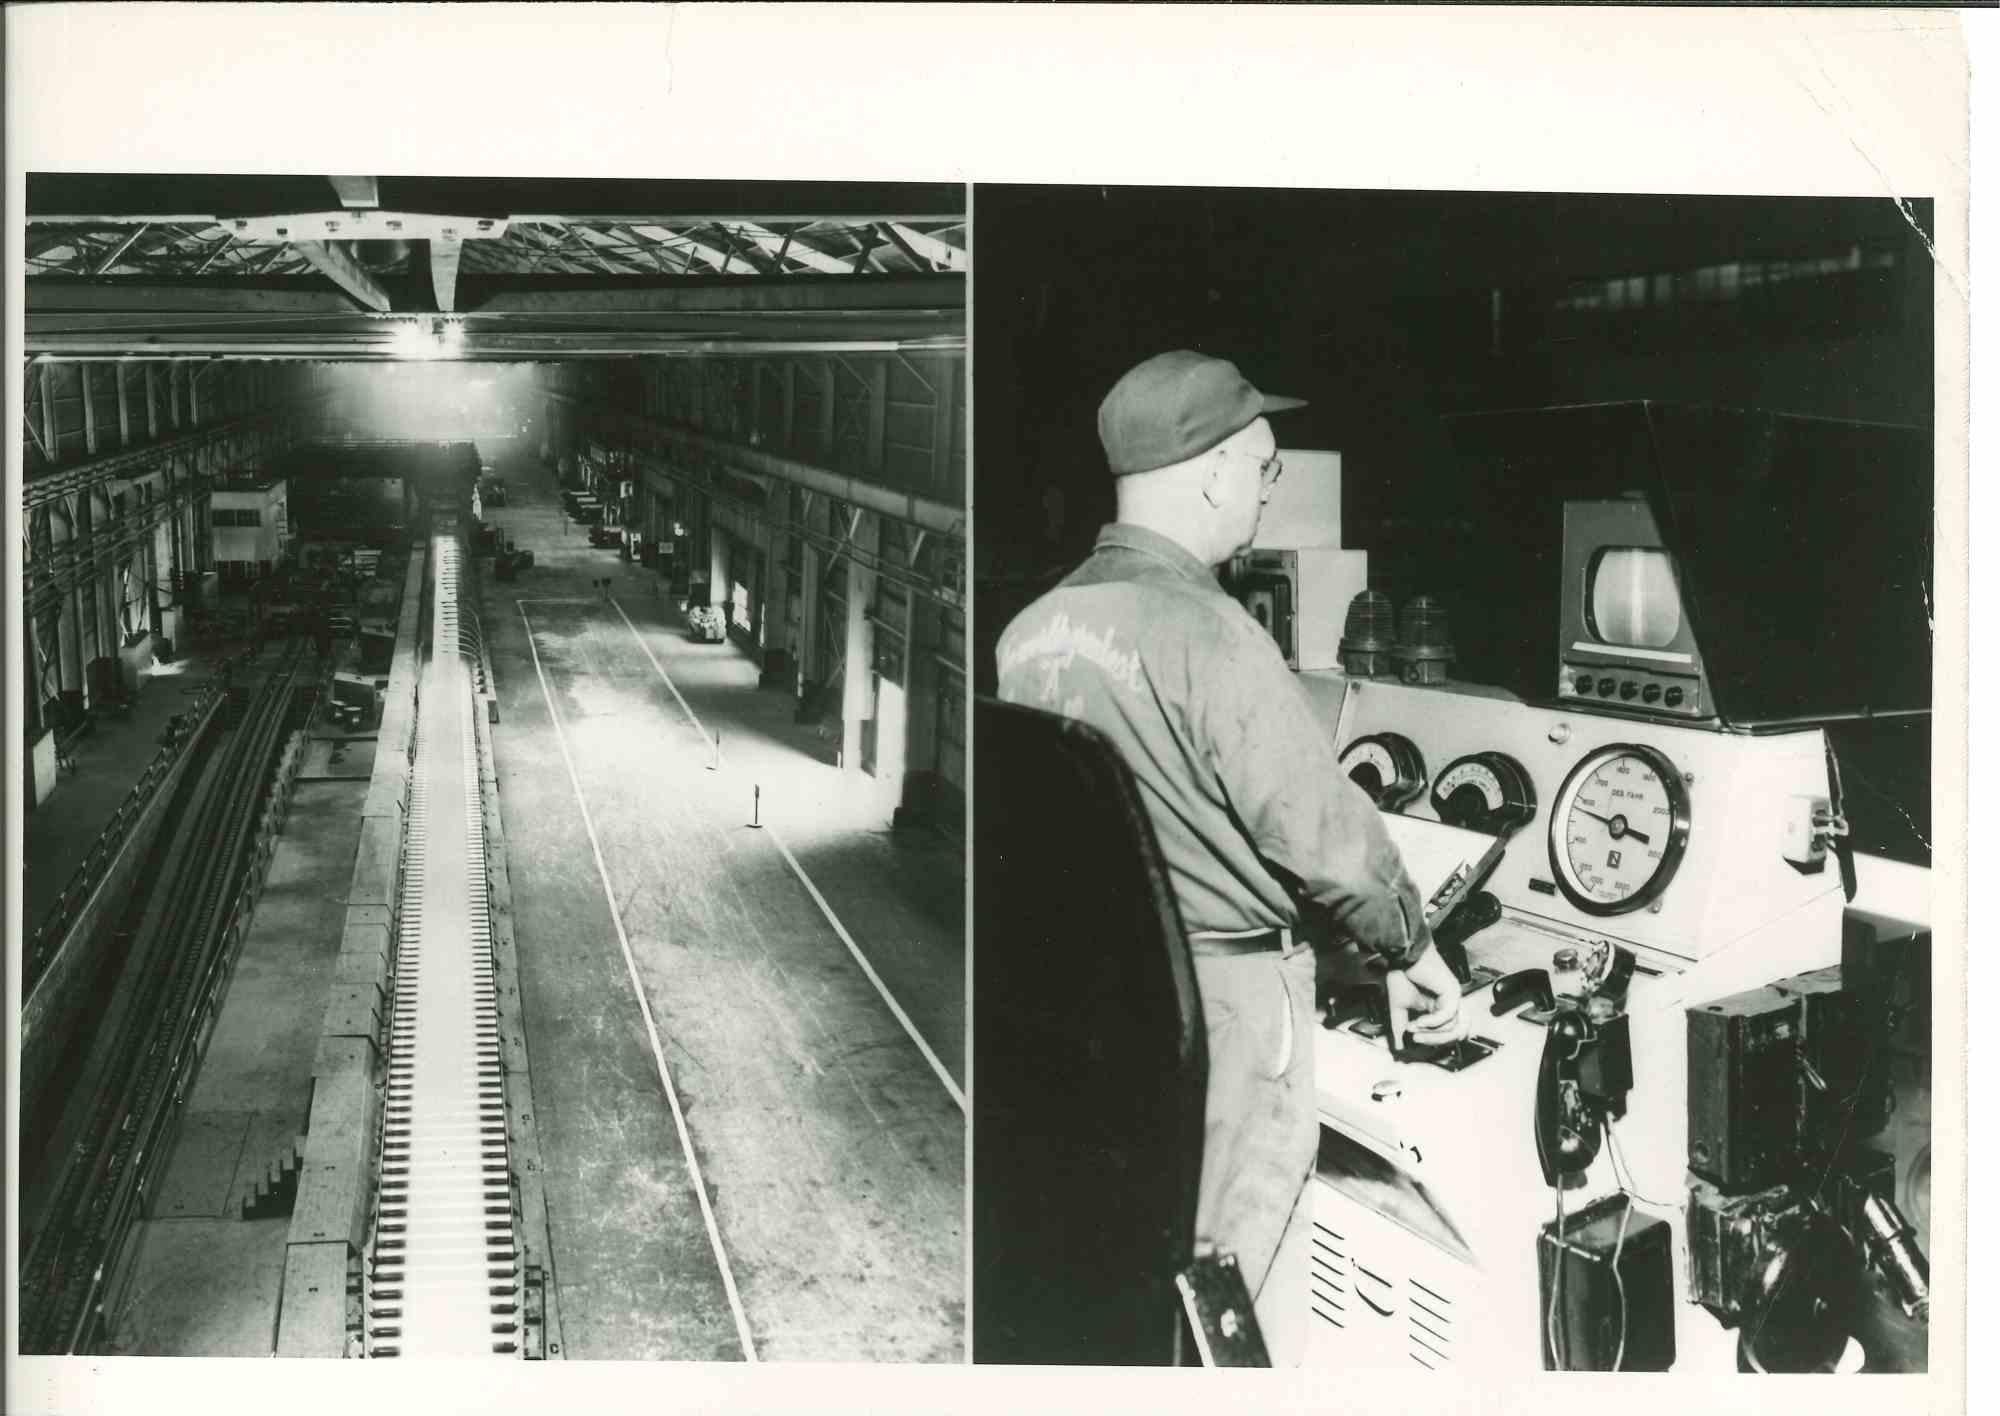 Unknown Figurative Photograph - Monitoring Steel Production - Vintage Photograph - Mid 20th Century